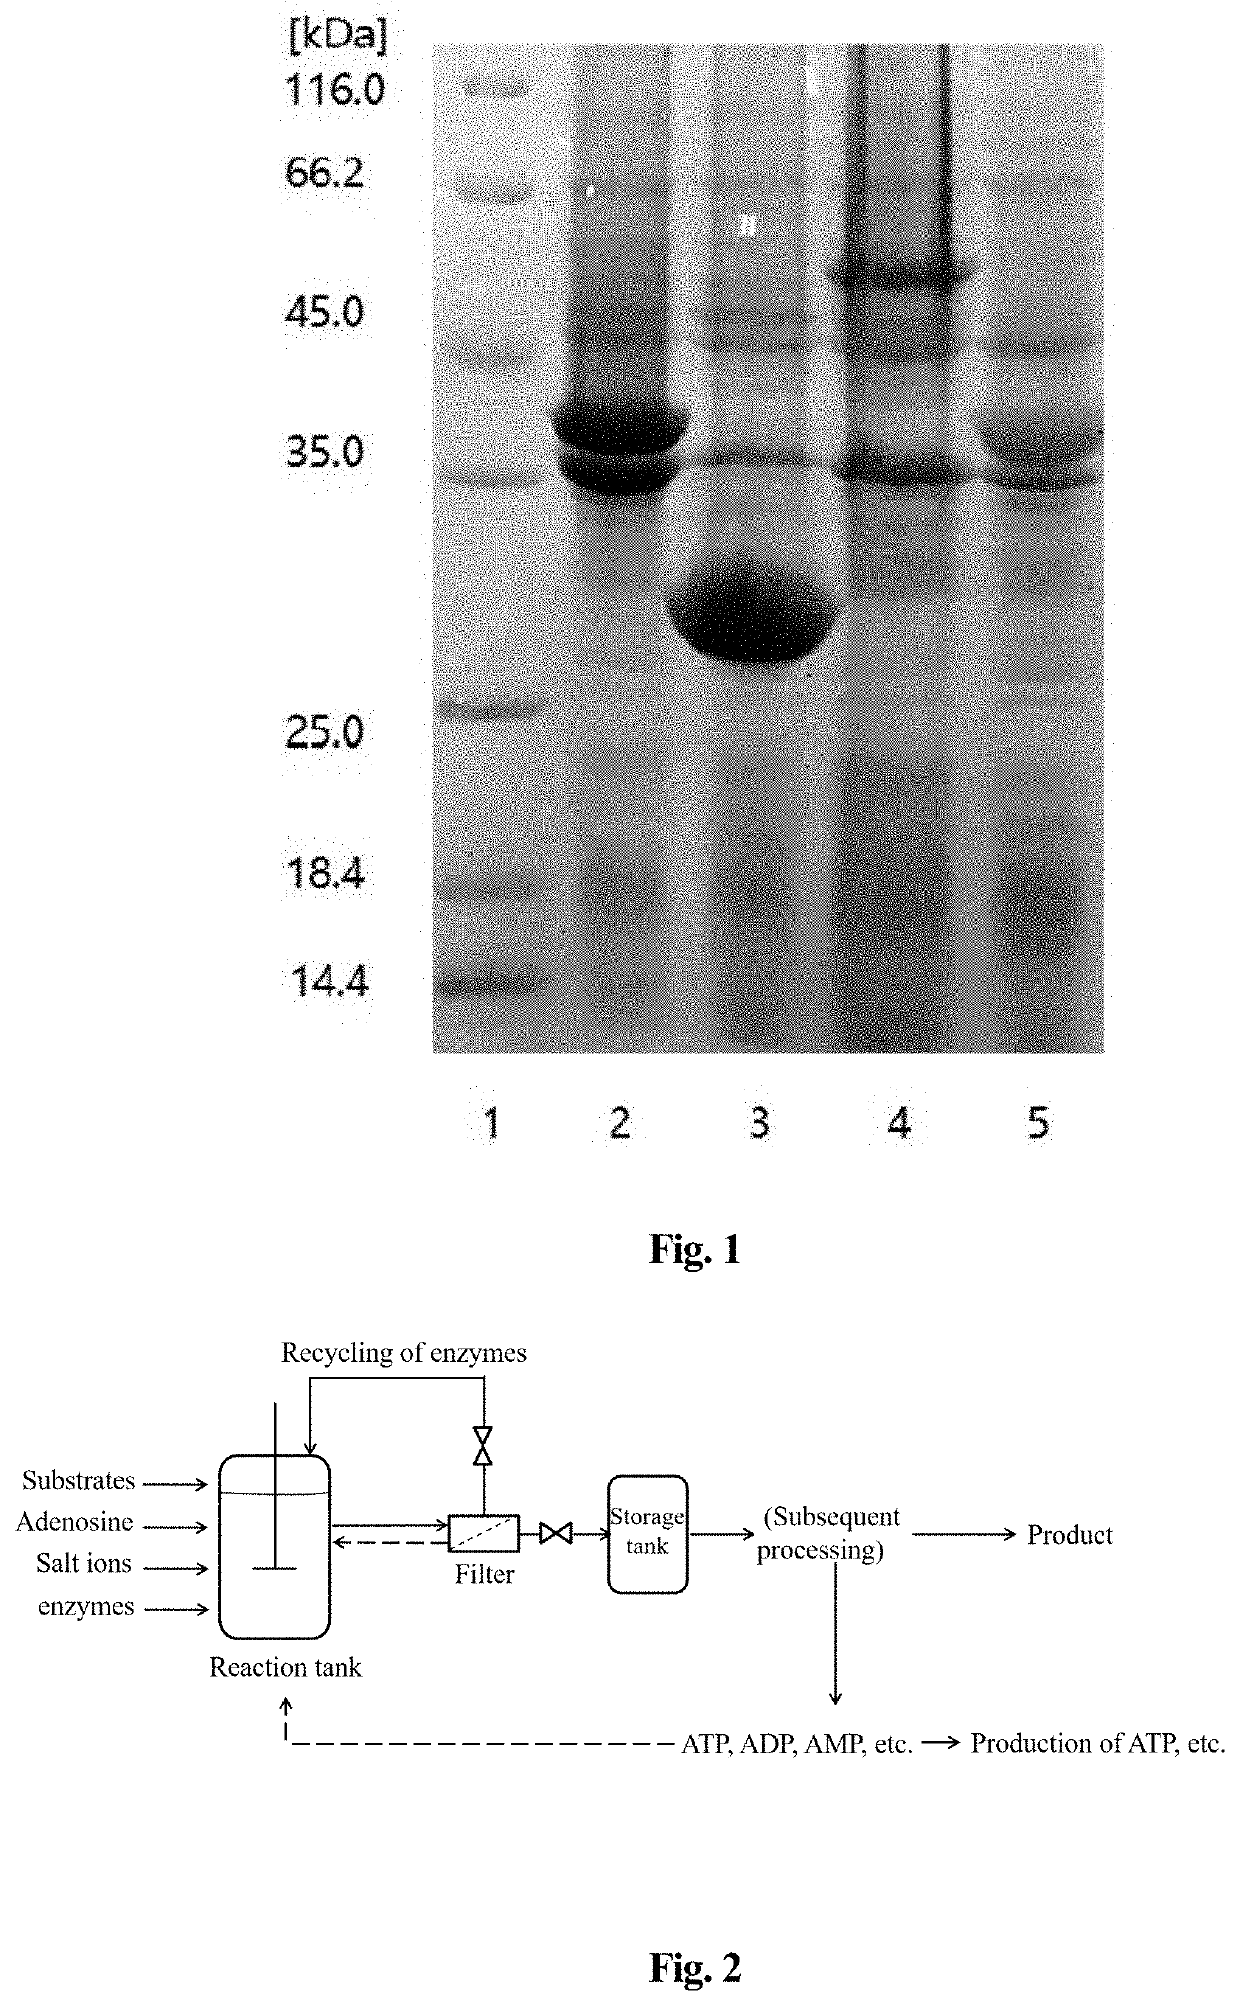 Method for producing enzymatic reaction by using adenosine to replace atp